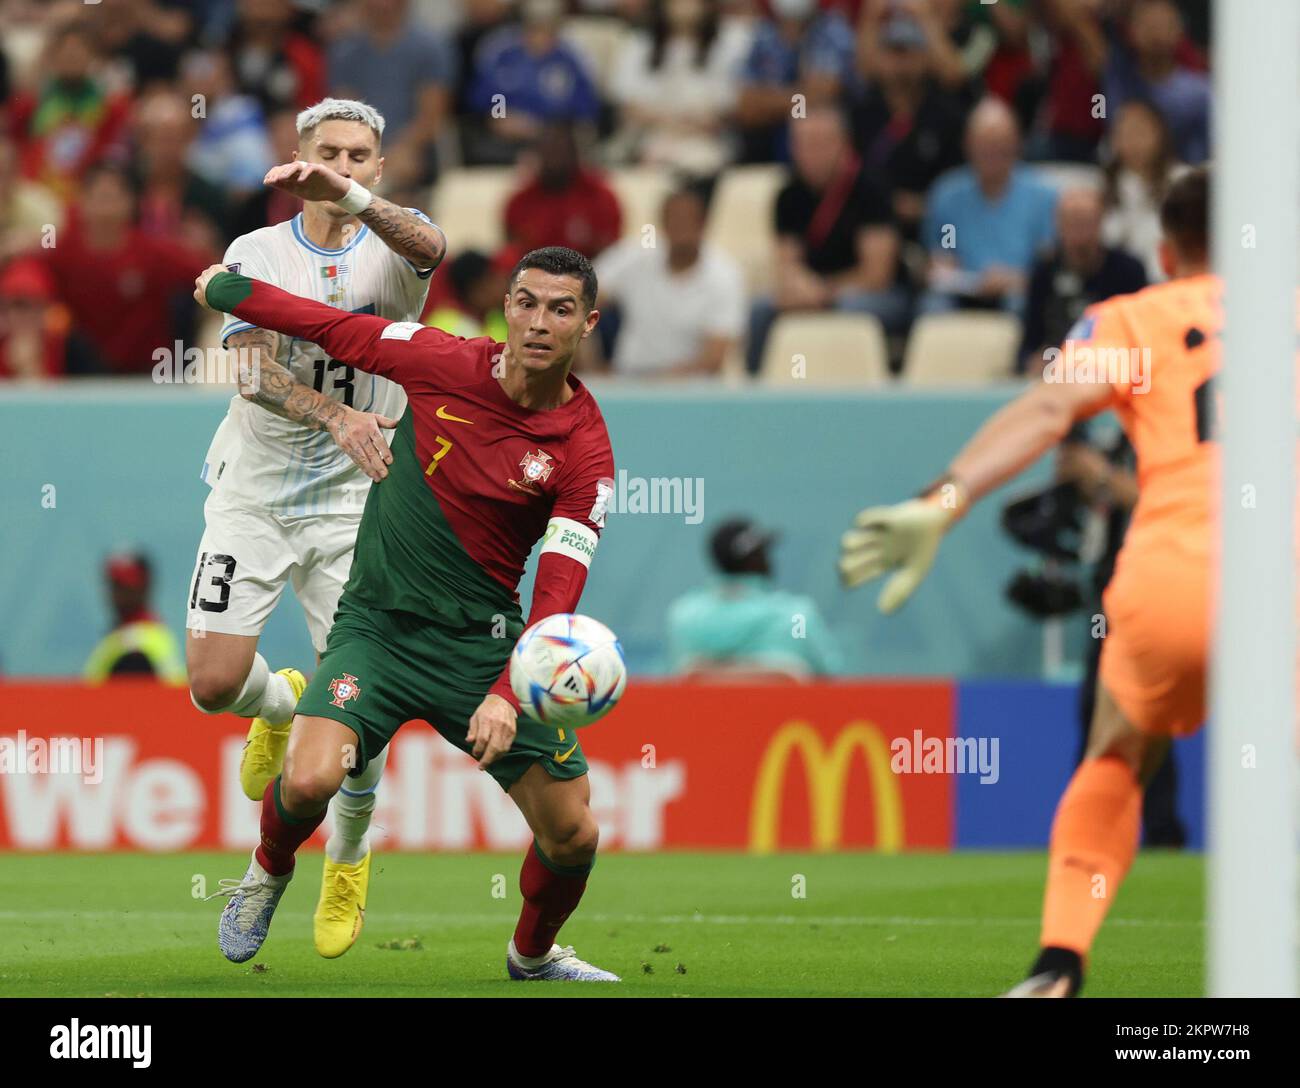 Lusail, Qatar. 28th Nov, 2022. Guillermo Varela (L) of Uruguay vies with Cristiano Ronaldo of Portugal during the Group H match between Portugal and Uruguay at the 2022 FIFA World Cup at Lusail Stadium in Lusail, Qatar, Nov. 28, 2022. Credit: Pan Yulong/Xinhua/Alamy Live News Stock Photo